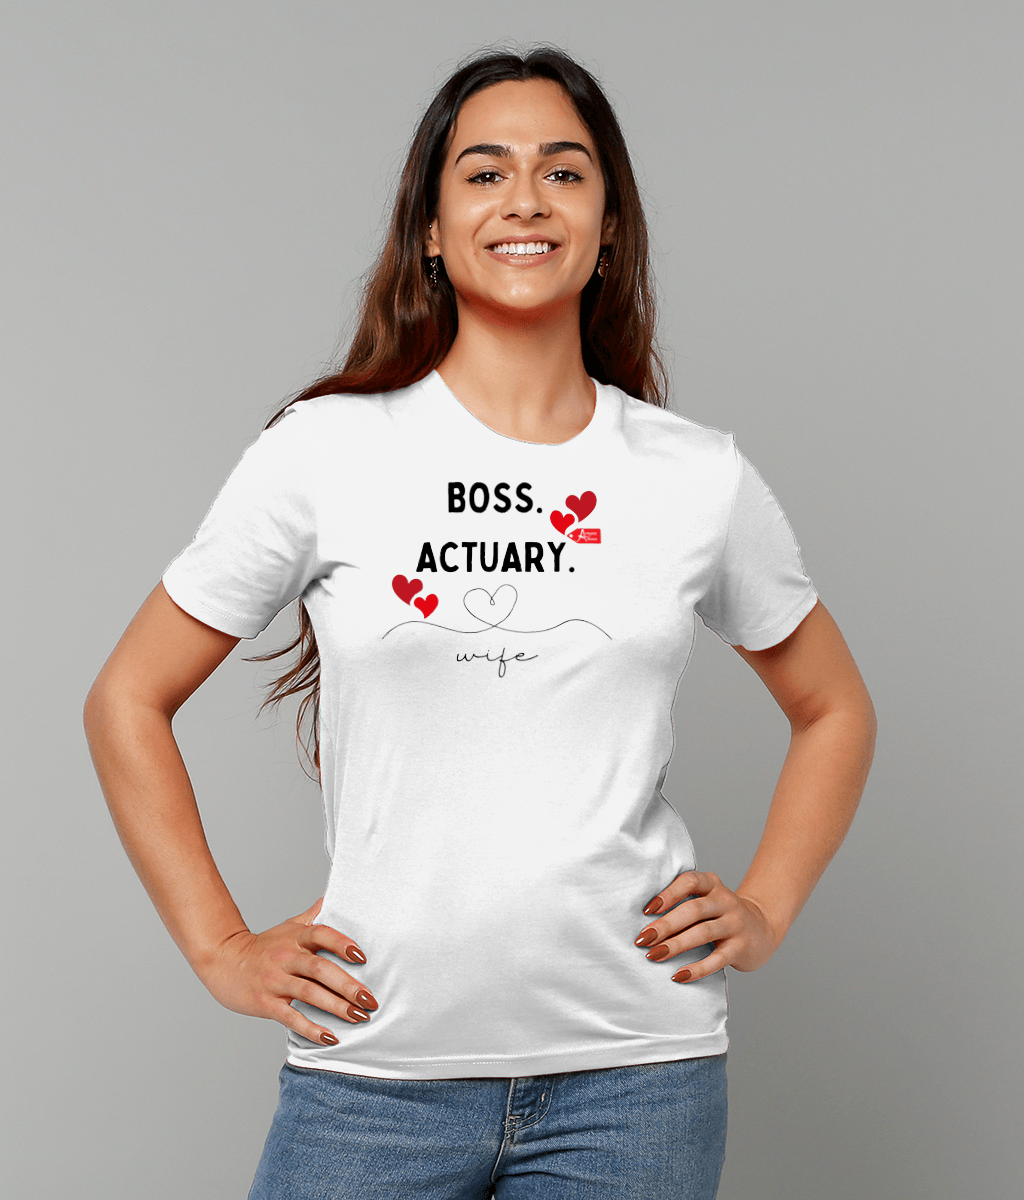 Boss Actuary Wife Hearts White T-Shirt